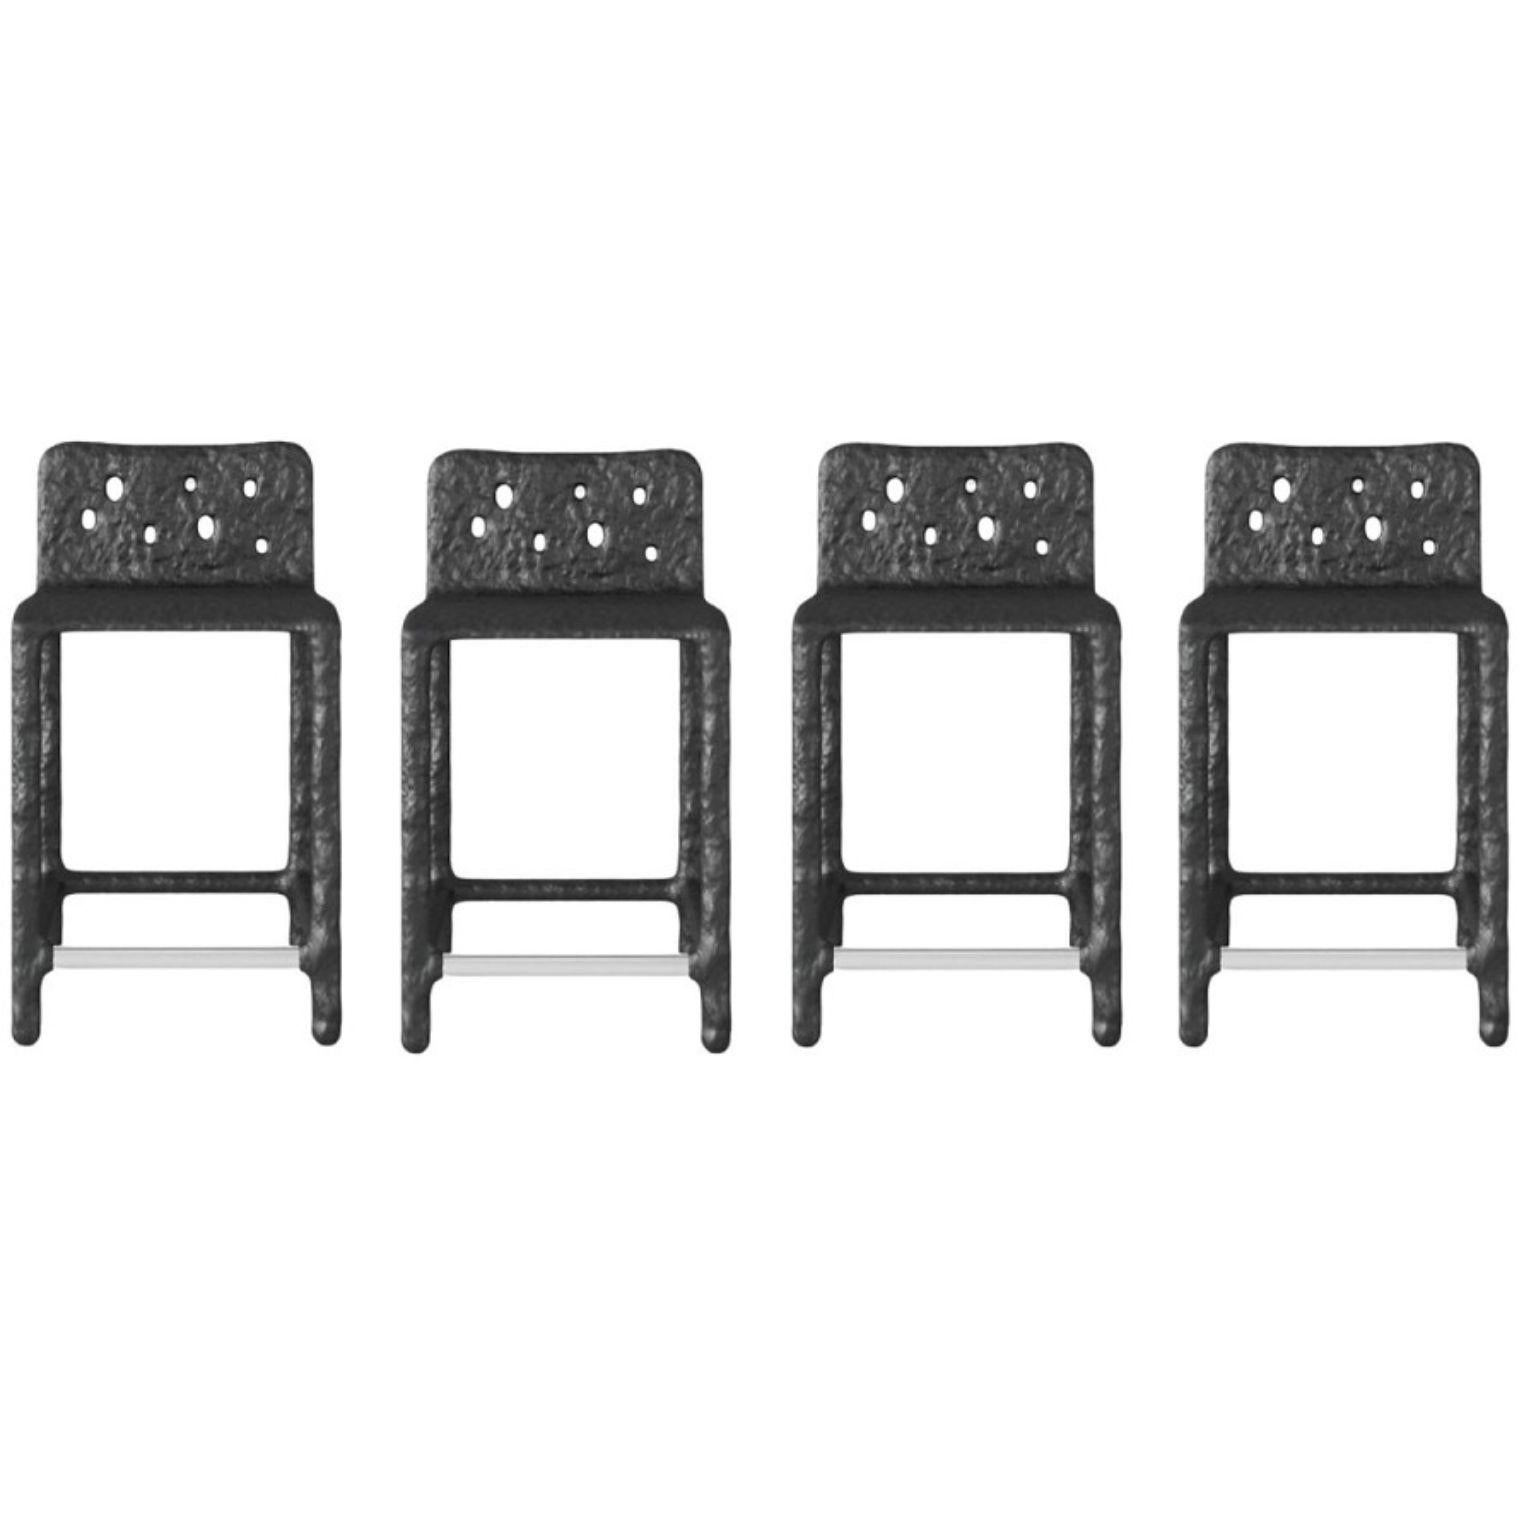 Set of 4 Outdoor Black Sculpted Contemporary Half-Bar Stools by Faina
Design: Victoriya Yakusha
Material: steel, flax rubber, biopolymer, cellulose
Dimensions: W 46 x D 47 x H 84 cm


The plastic silhouette and slightly primitive form of